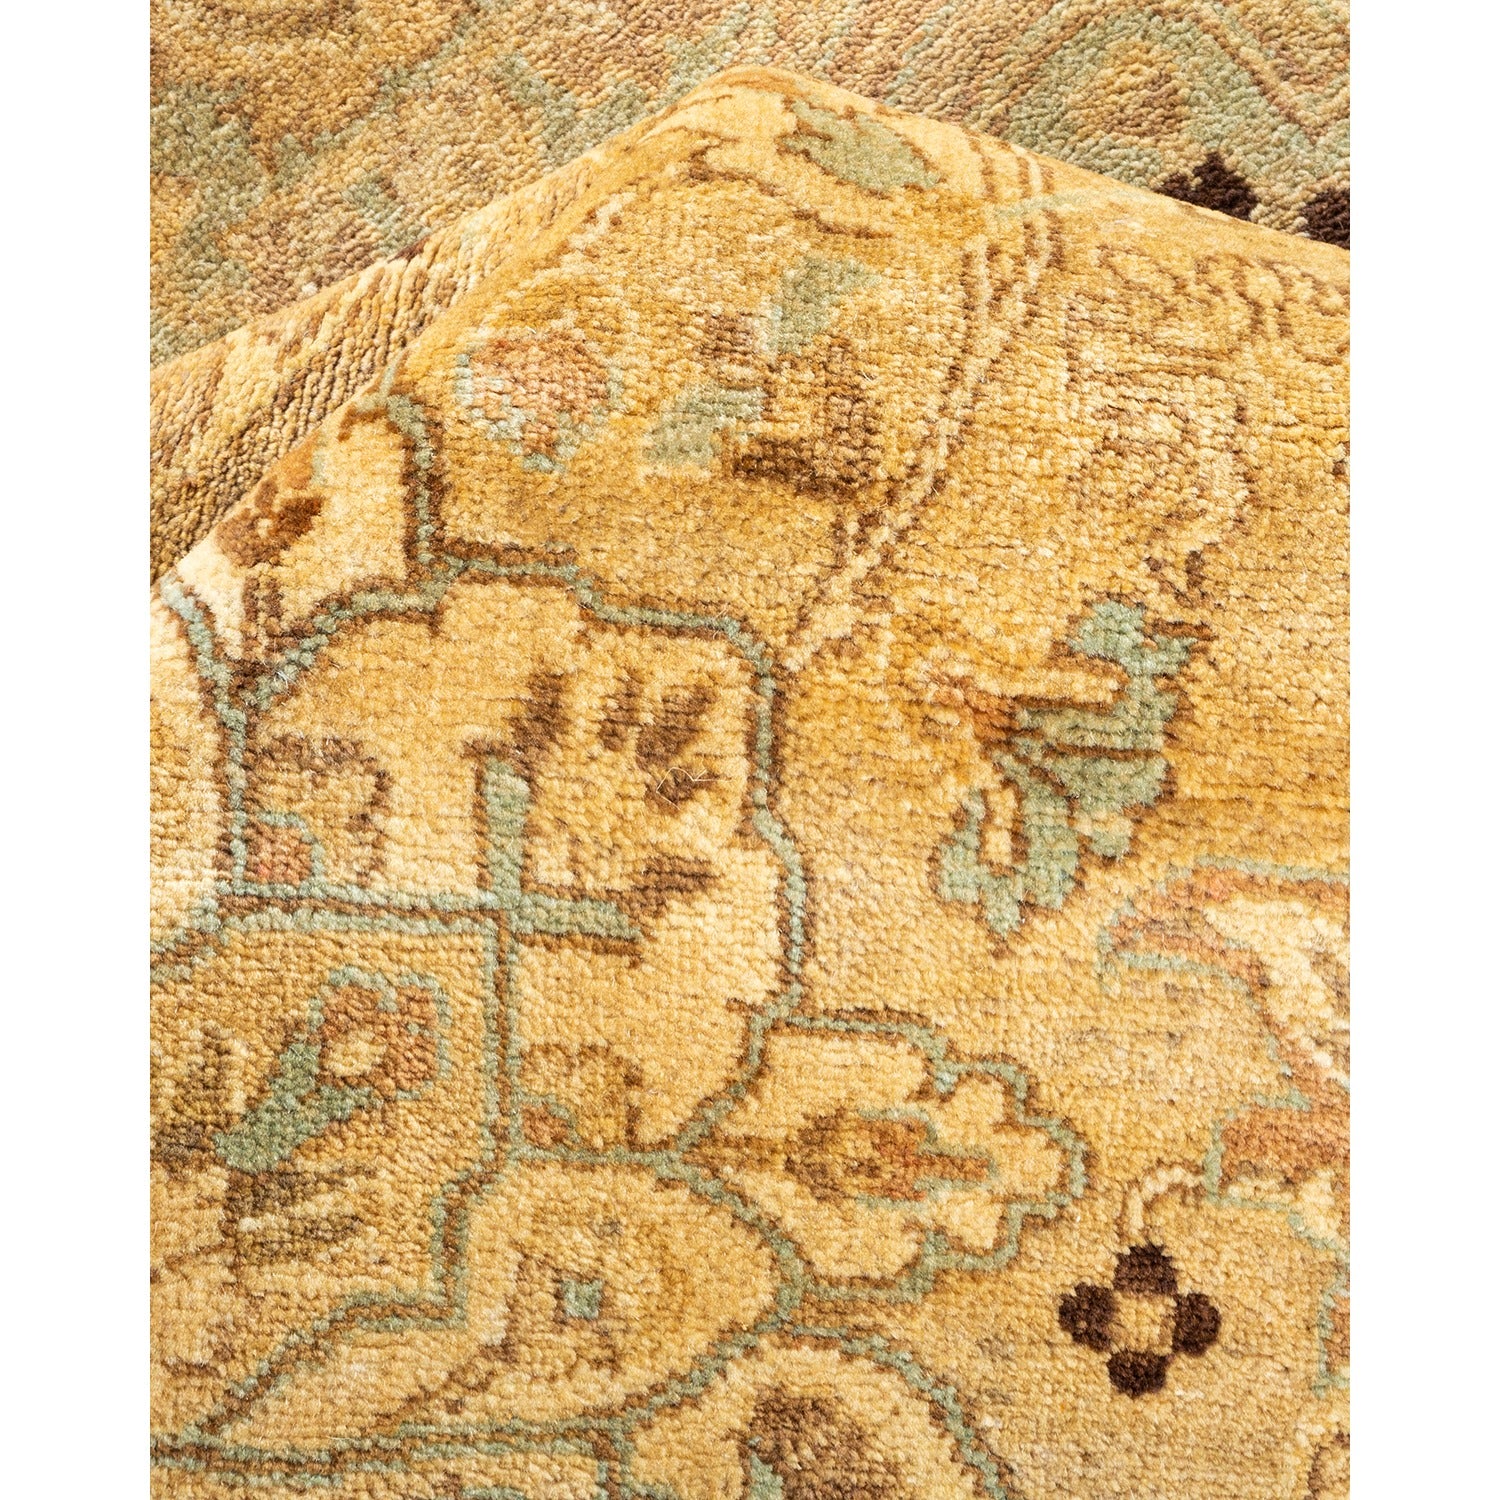 Close-up of a detailed floral patterned carpet in muted colors.